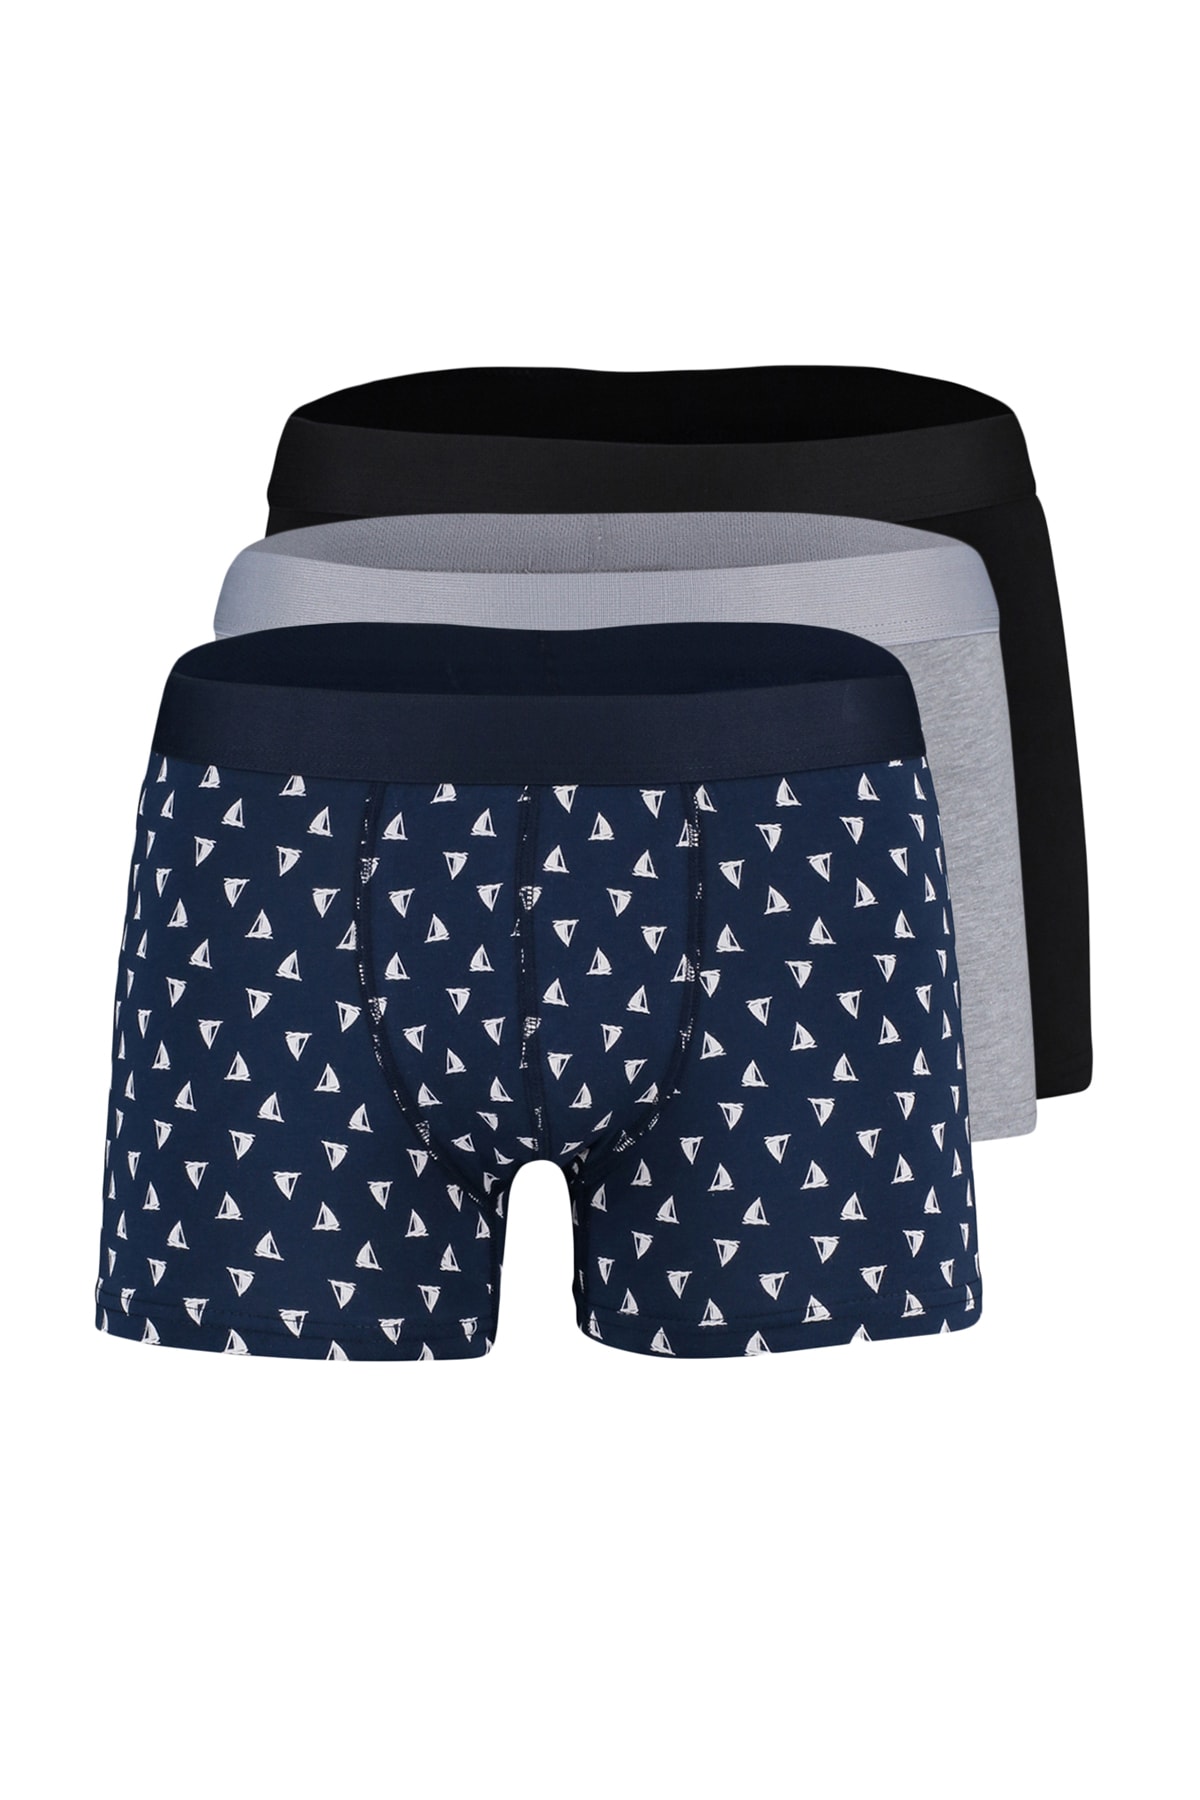 Trendyol Multicolored 3-Piece Marine Patterned-Plain Pack Cotton Boxers